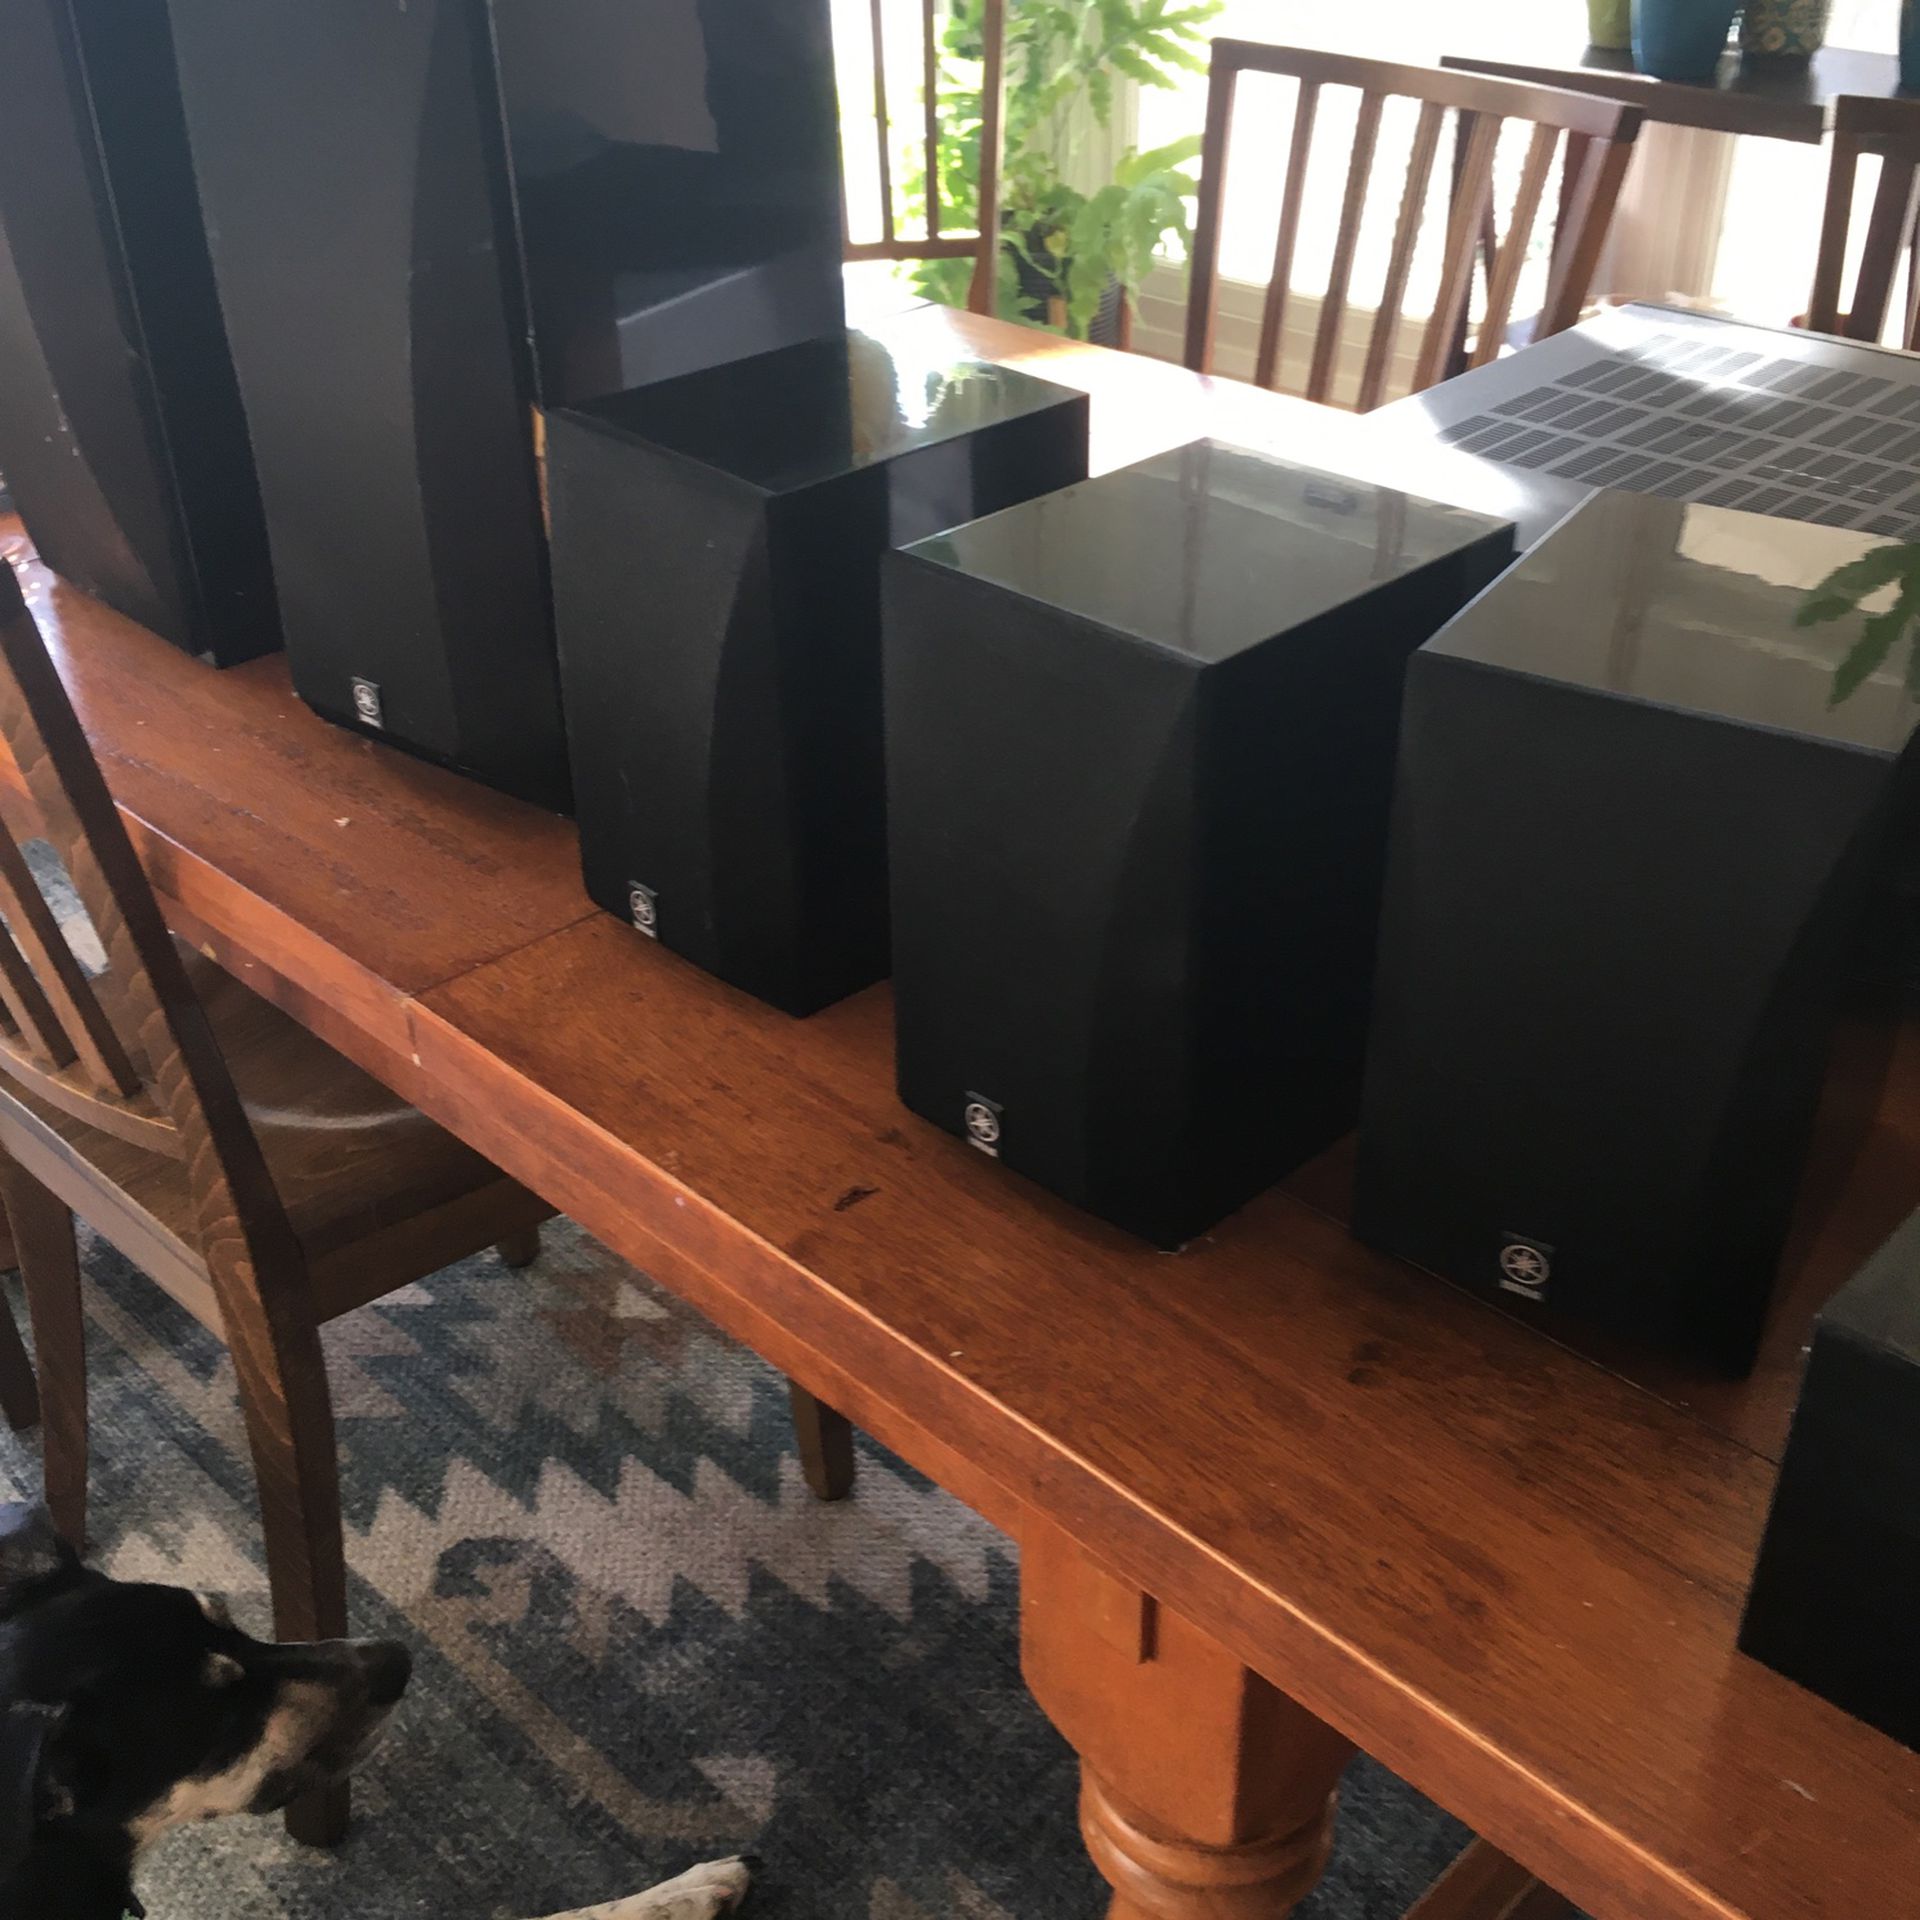 Yamaha Sound System - Receiver , Speakers, Subwoofer Over $700 New